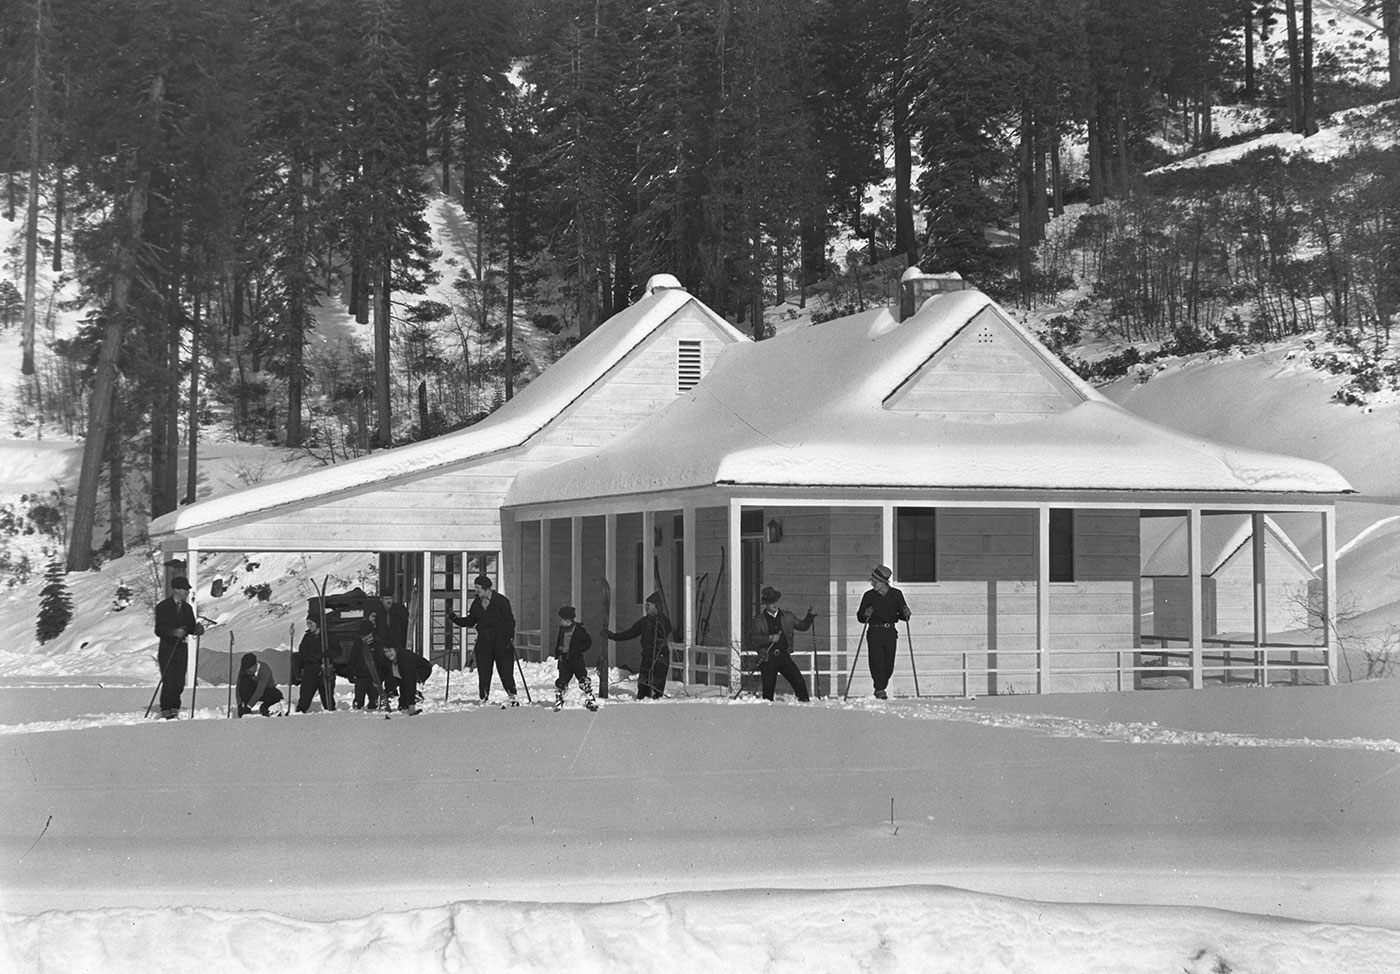 Historic photo of the Chinquapin Ski Hut with snow and skiers.